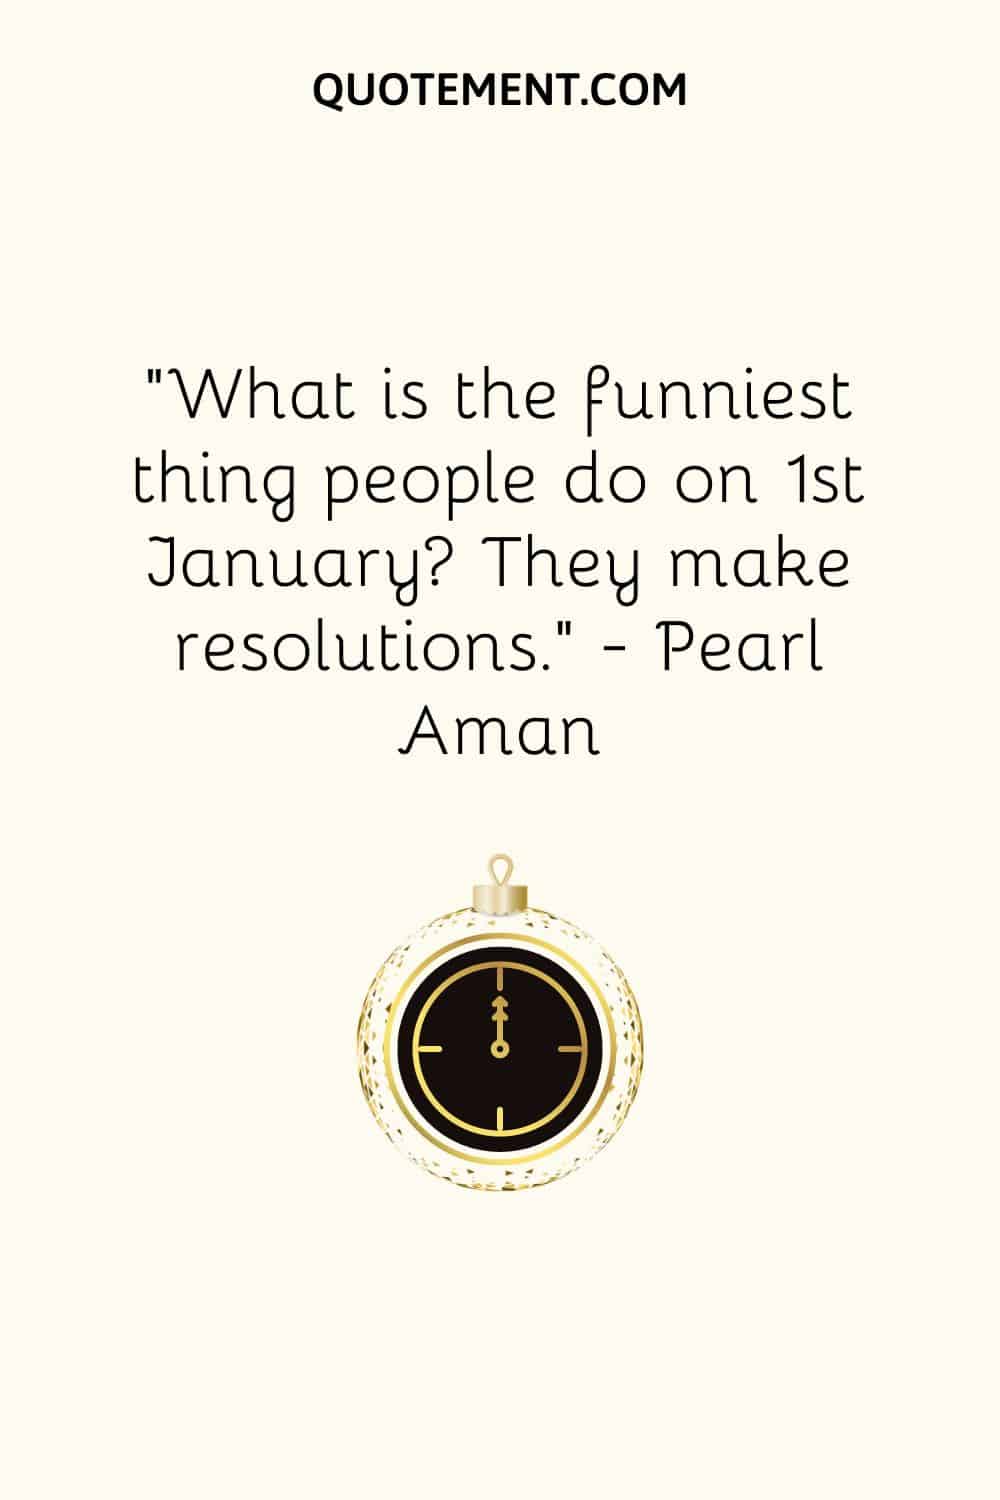 “What is the funniest thing people do on 1st January They make resolutions.” ― Pearl Aman